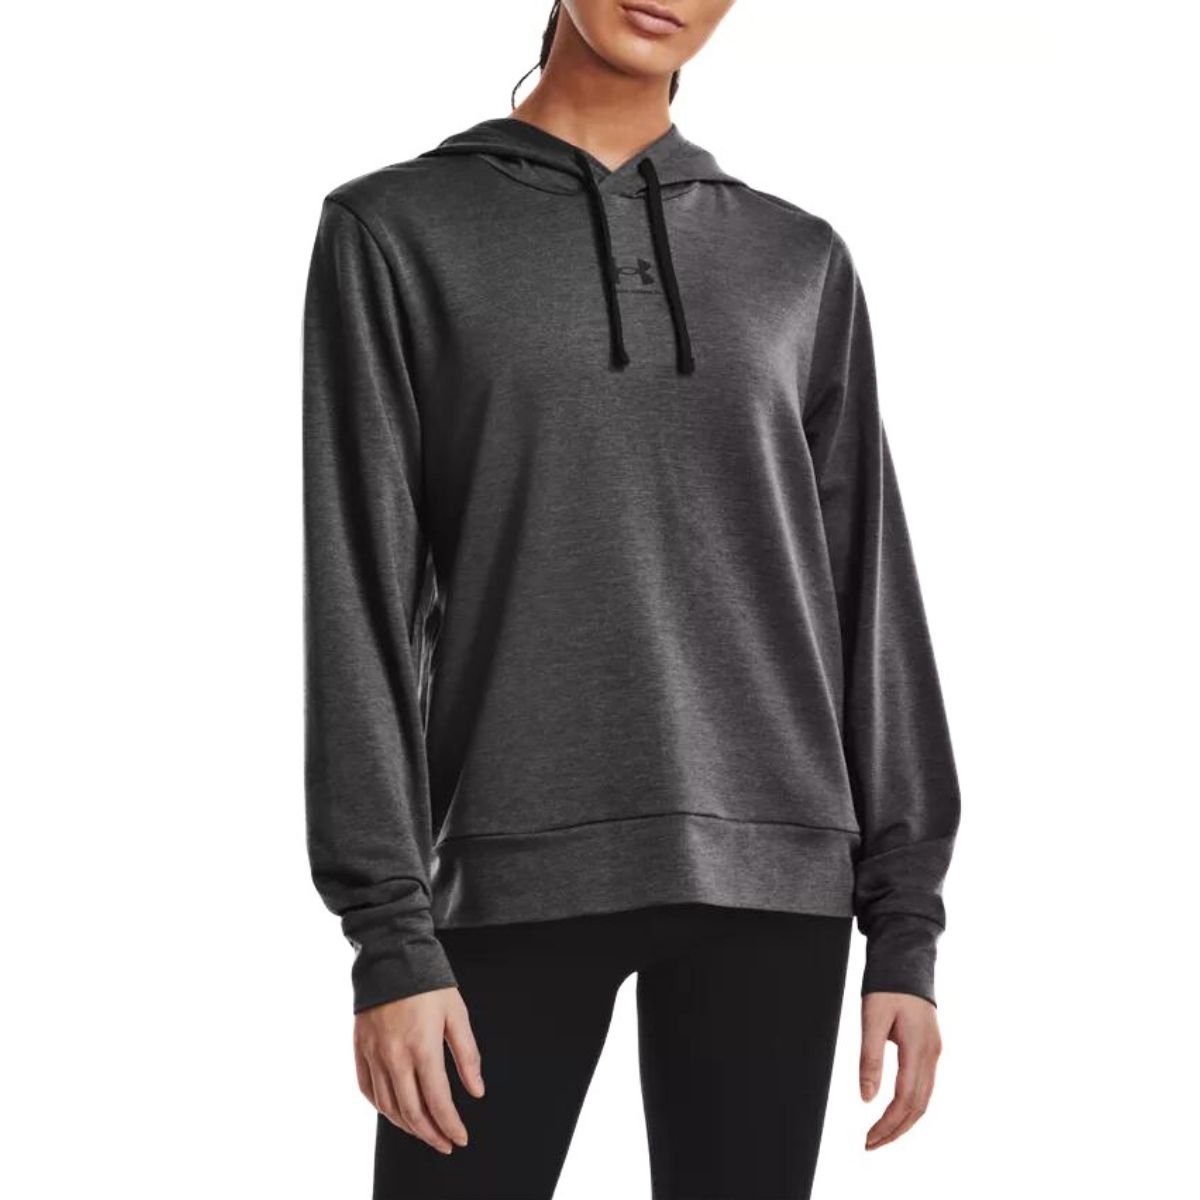 Mikina Under Armour Rival Terry Hoodie W - sivá